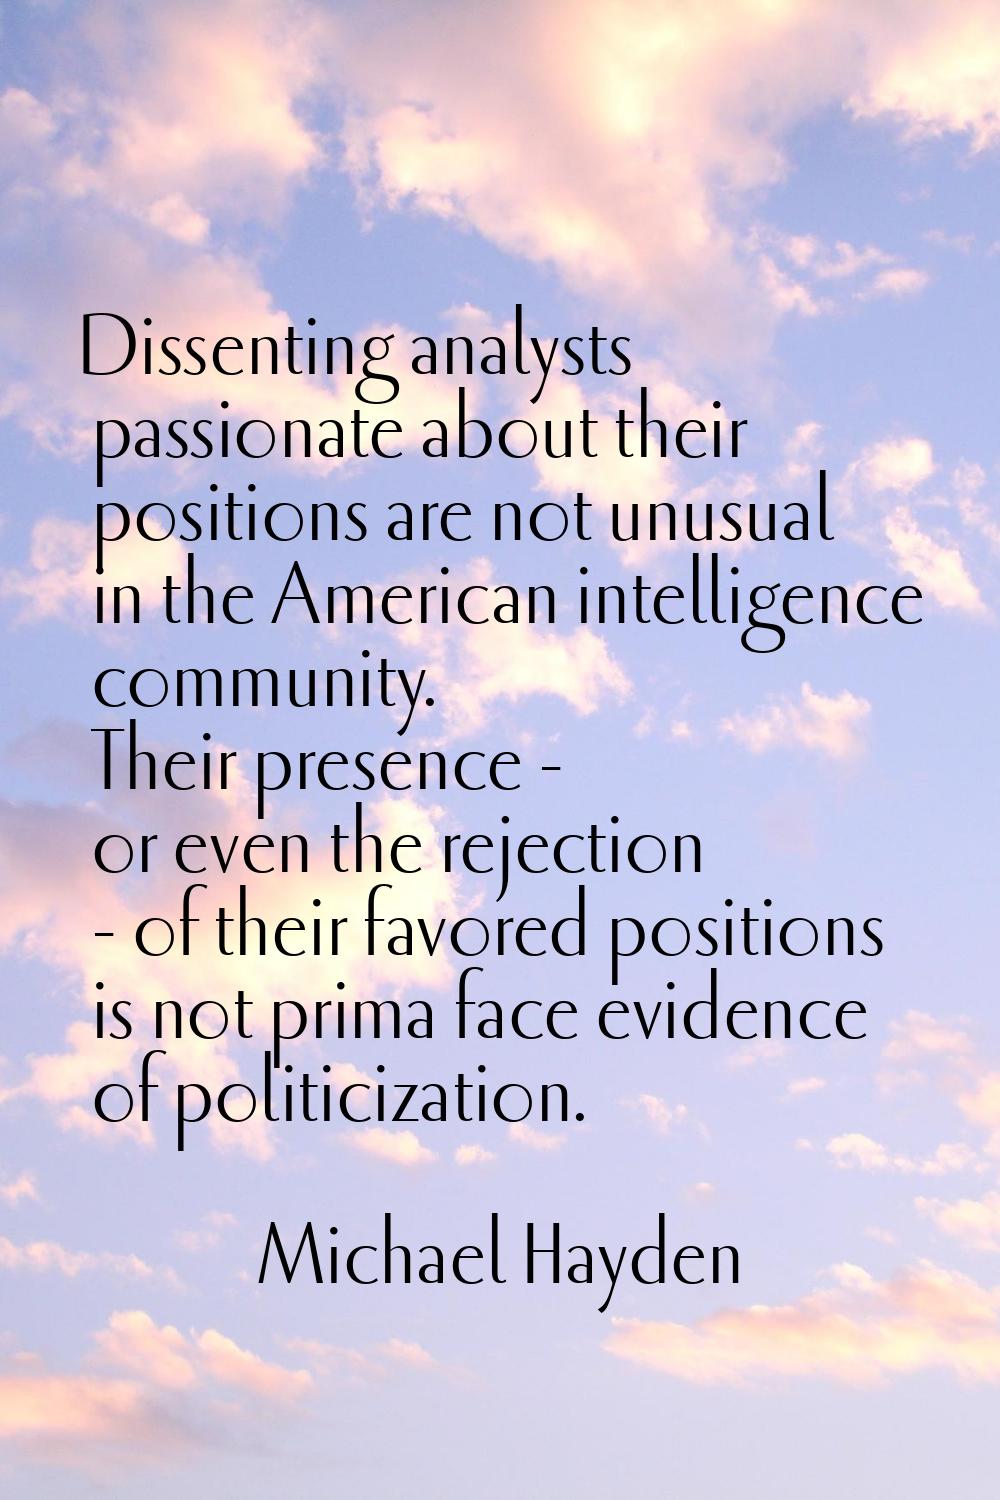 Dissenting analysts passionate about their positions are not unusual in the American intelligence c